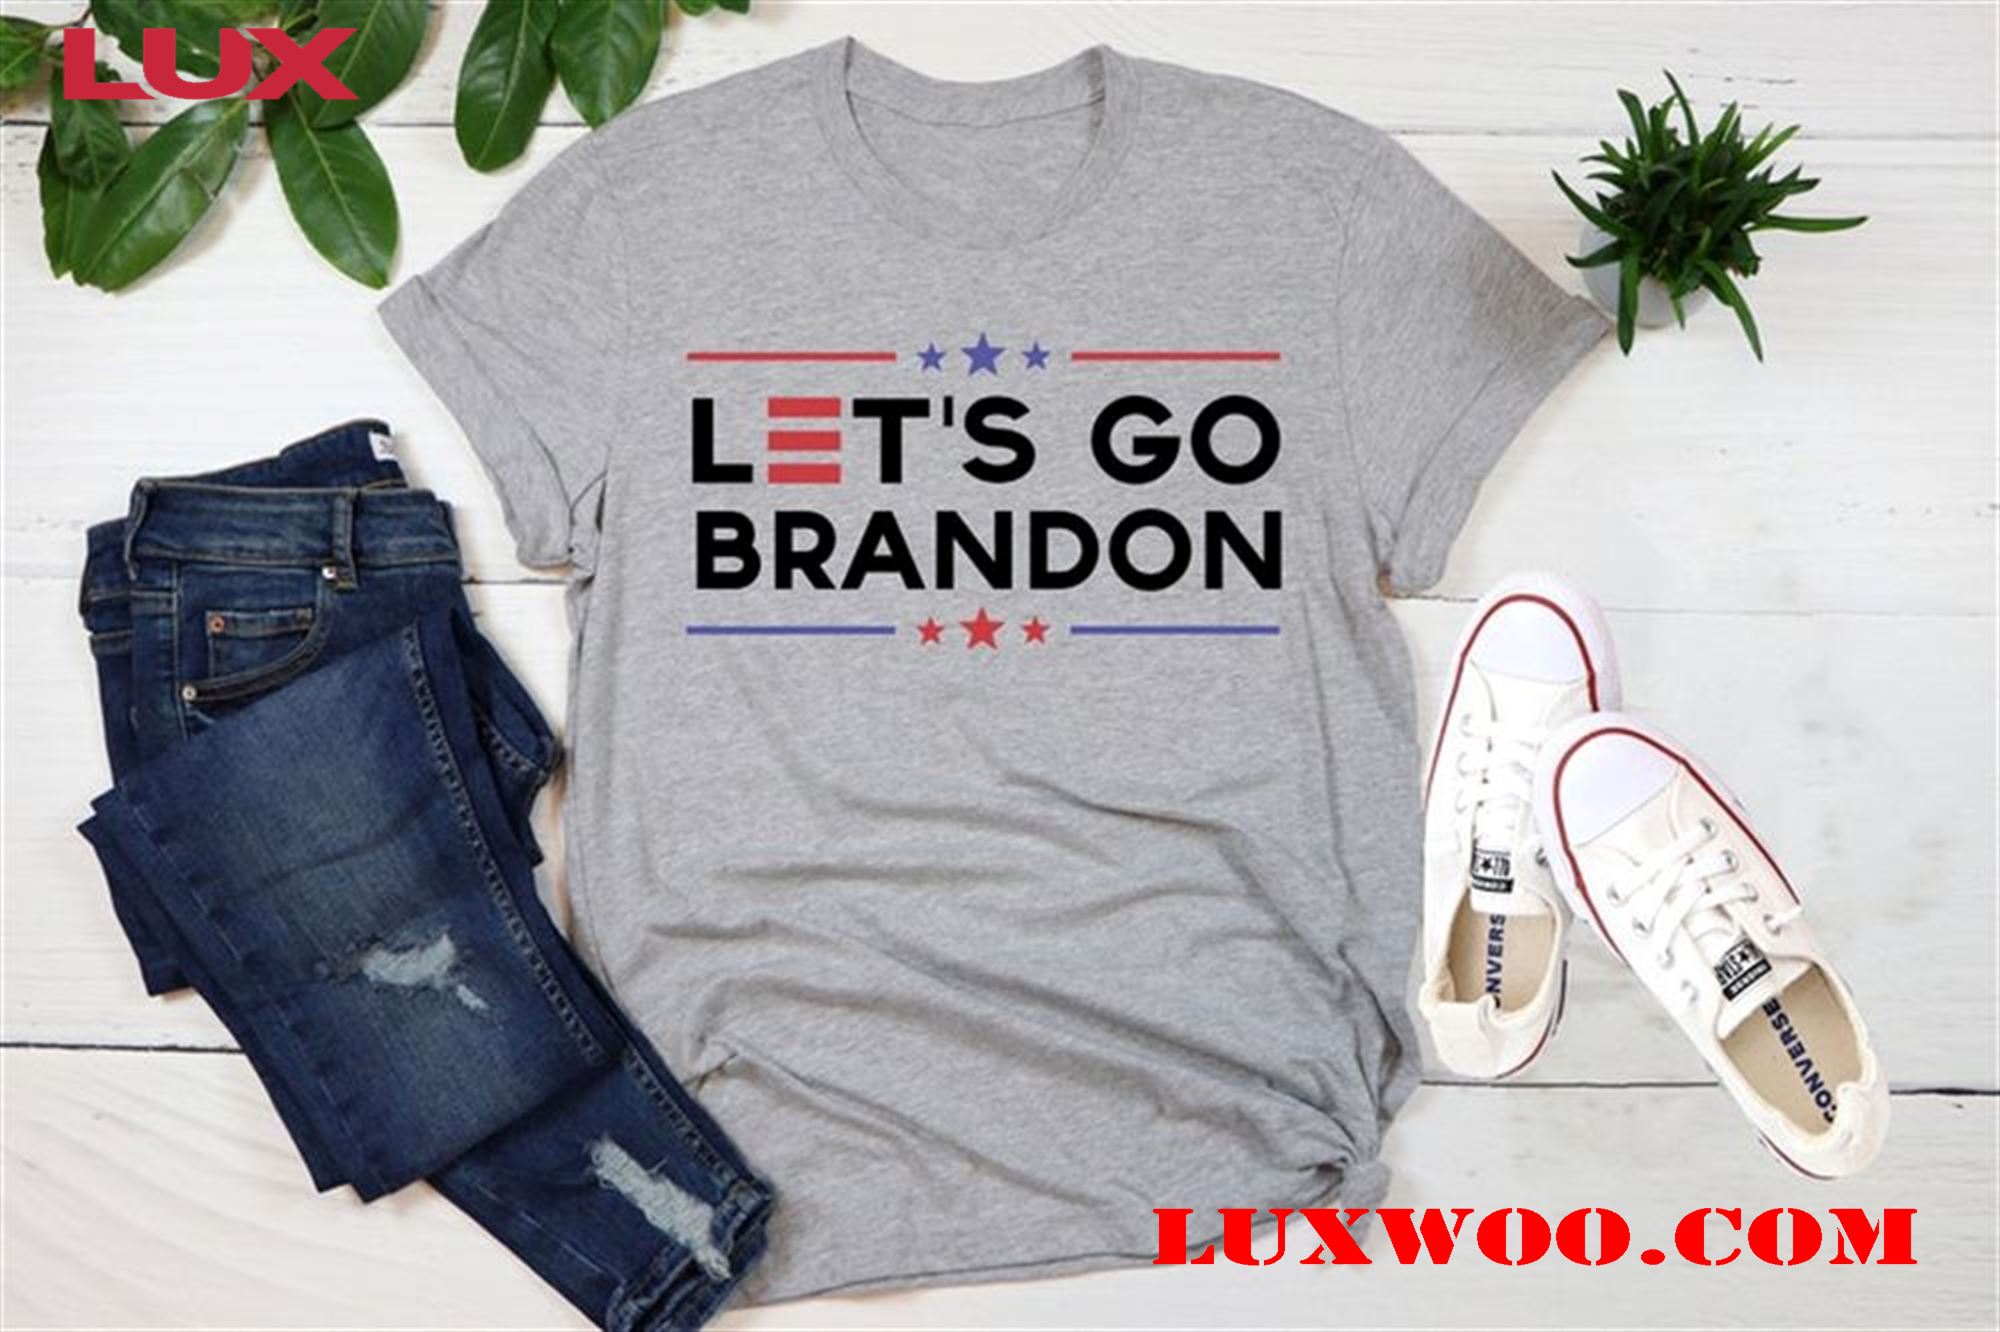 Show Your Support For Conservative Values With Let's Go Brandon Shirt